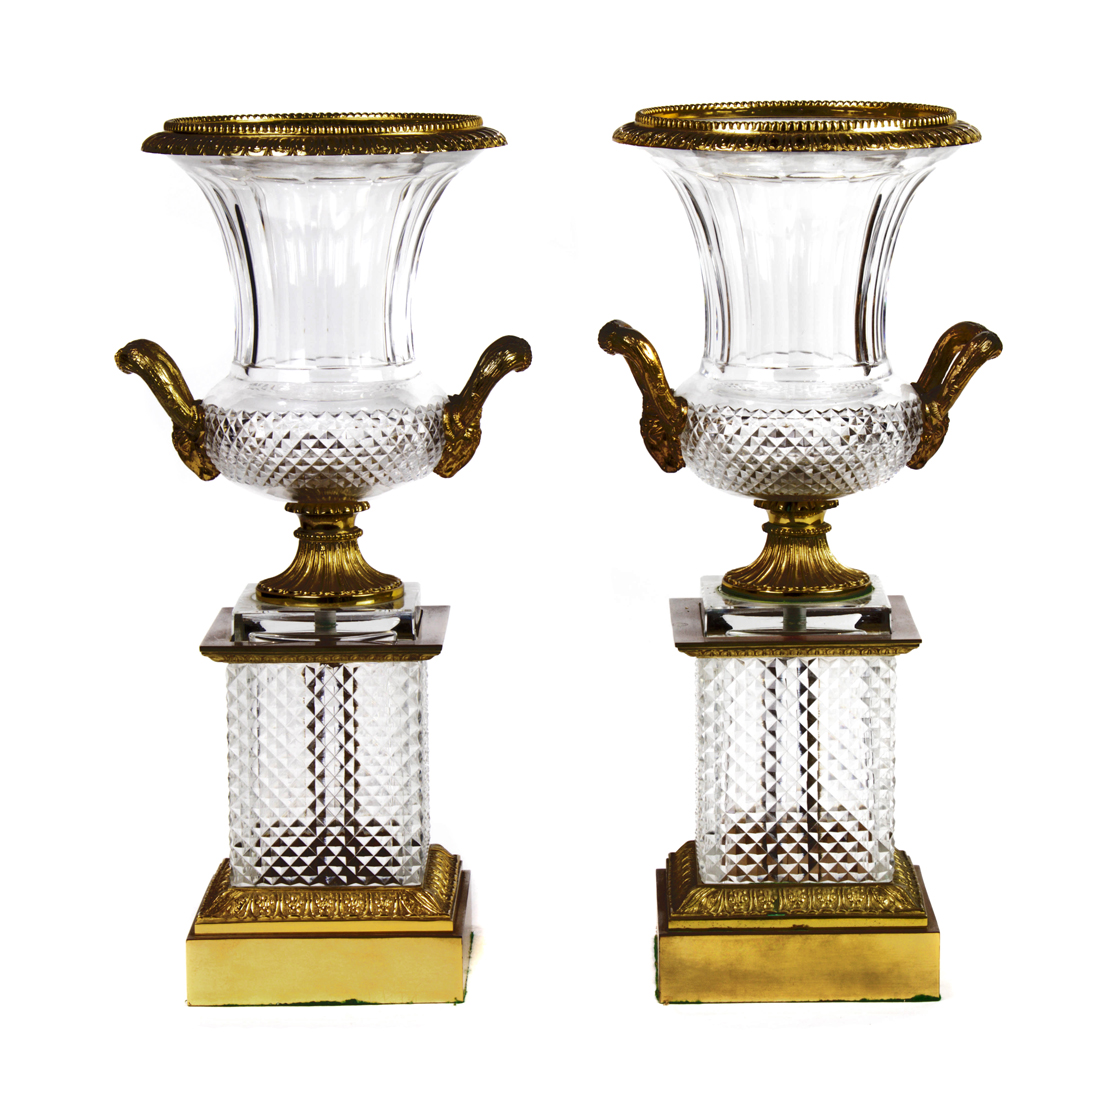 A PAIR OF NEOCLASSICAL STYLE GILT